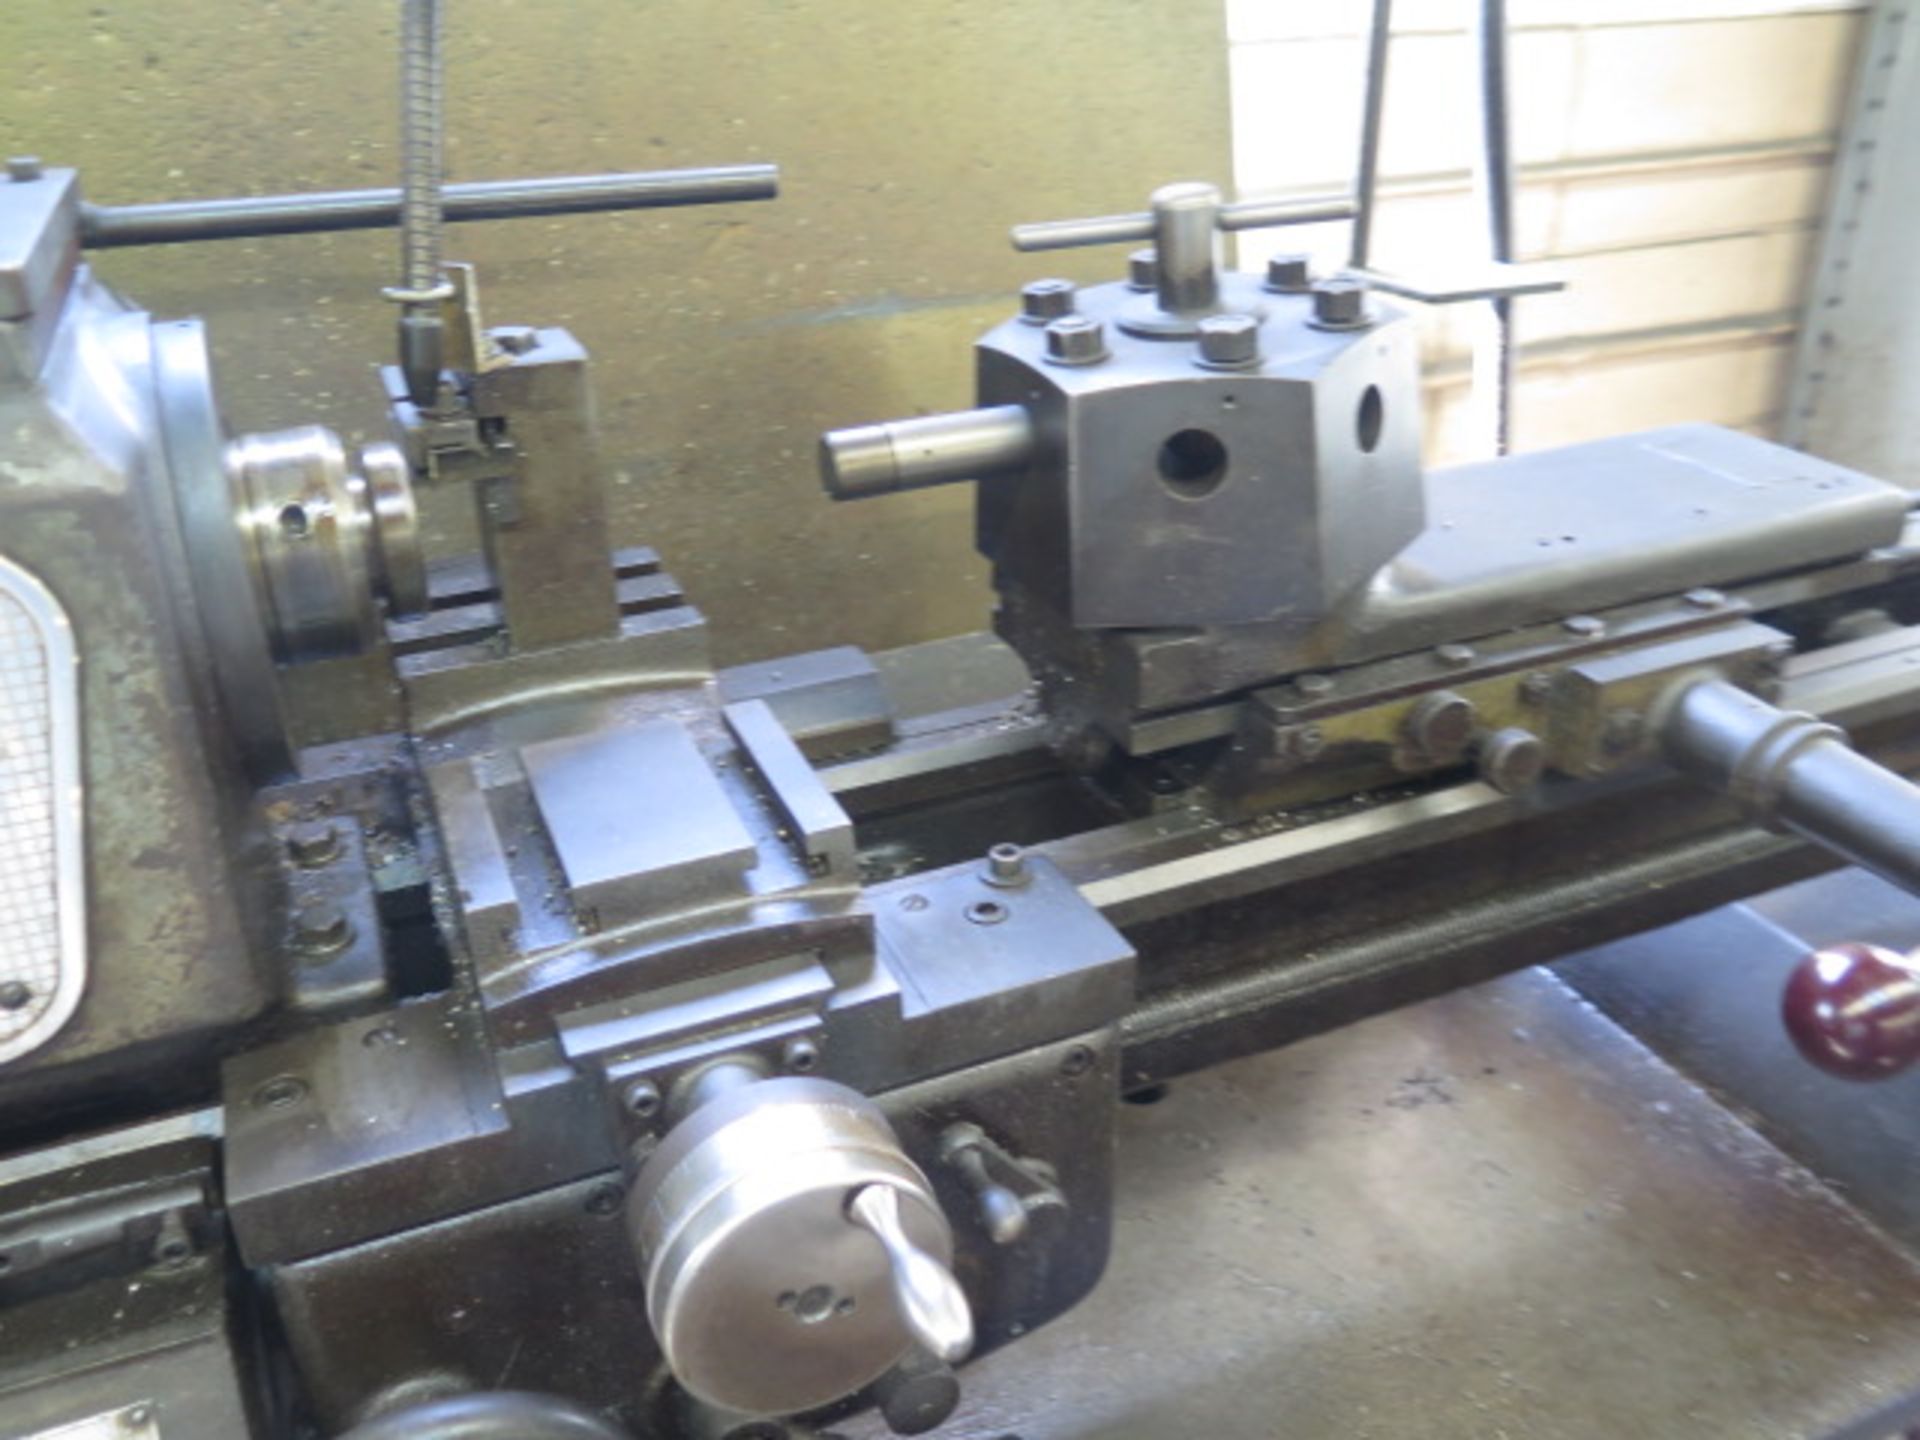 Logan mdl. 2557VH Second OP Lathe w/ 55-2000 Dial RPM, Inch Threading, 6-Station Turret, SOLD AS IS - Image 6 of 9